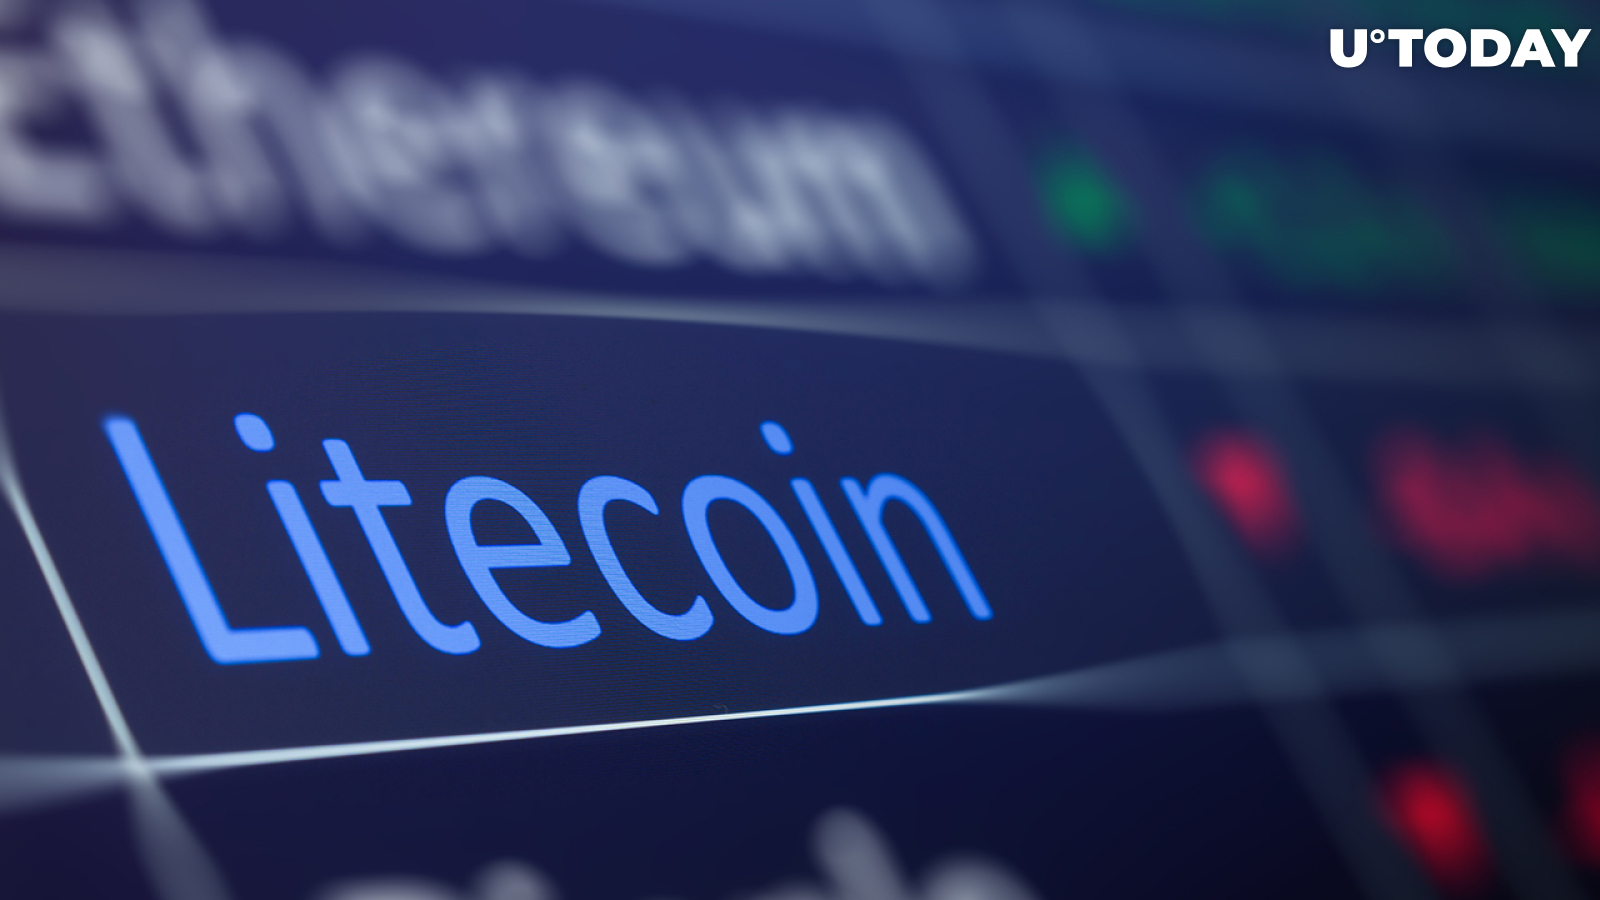 Litecoin Could Be Delisted from Large Cryptocurrency Exchanges Because of This Update